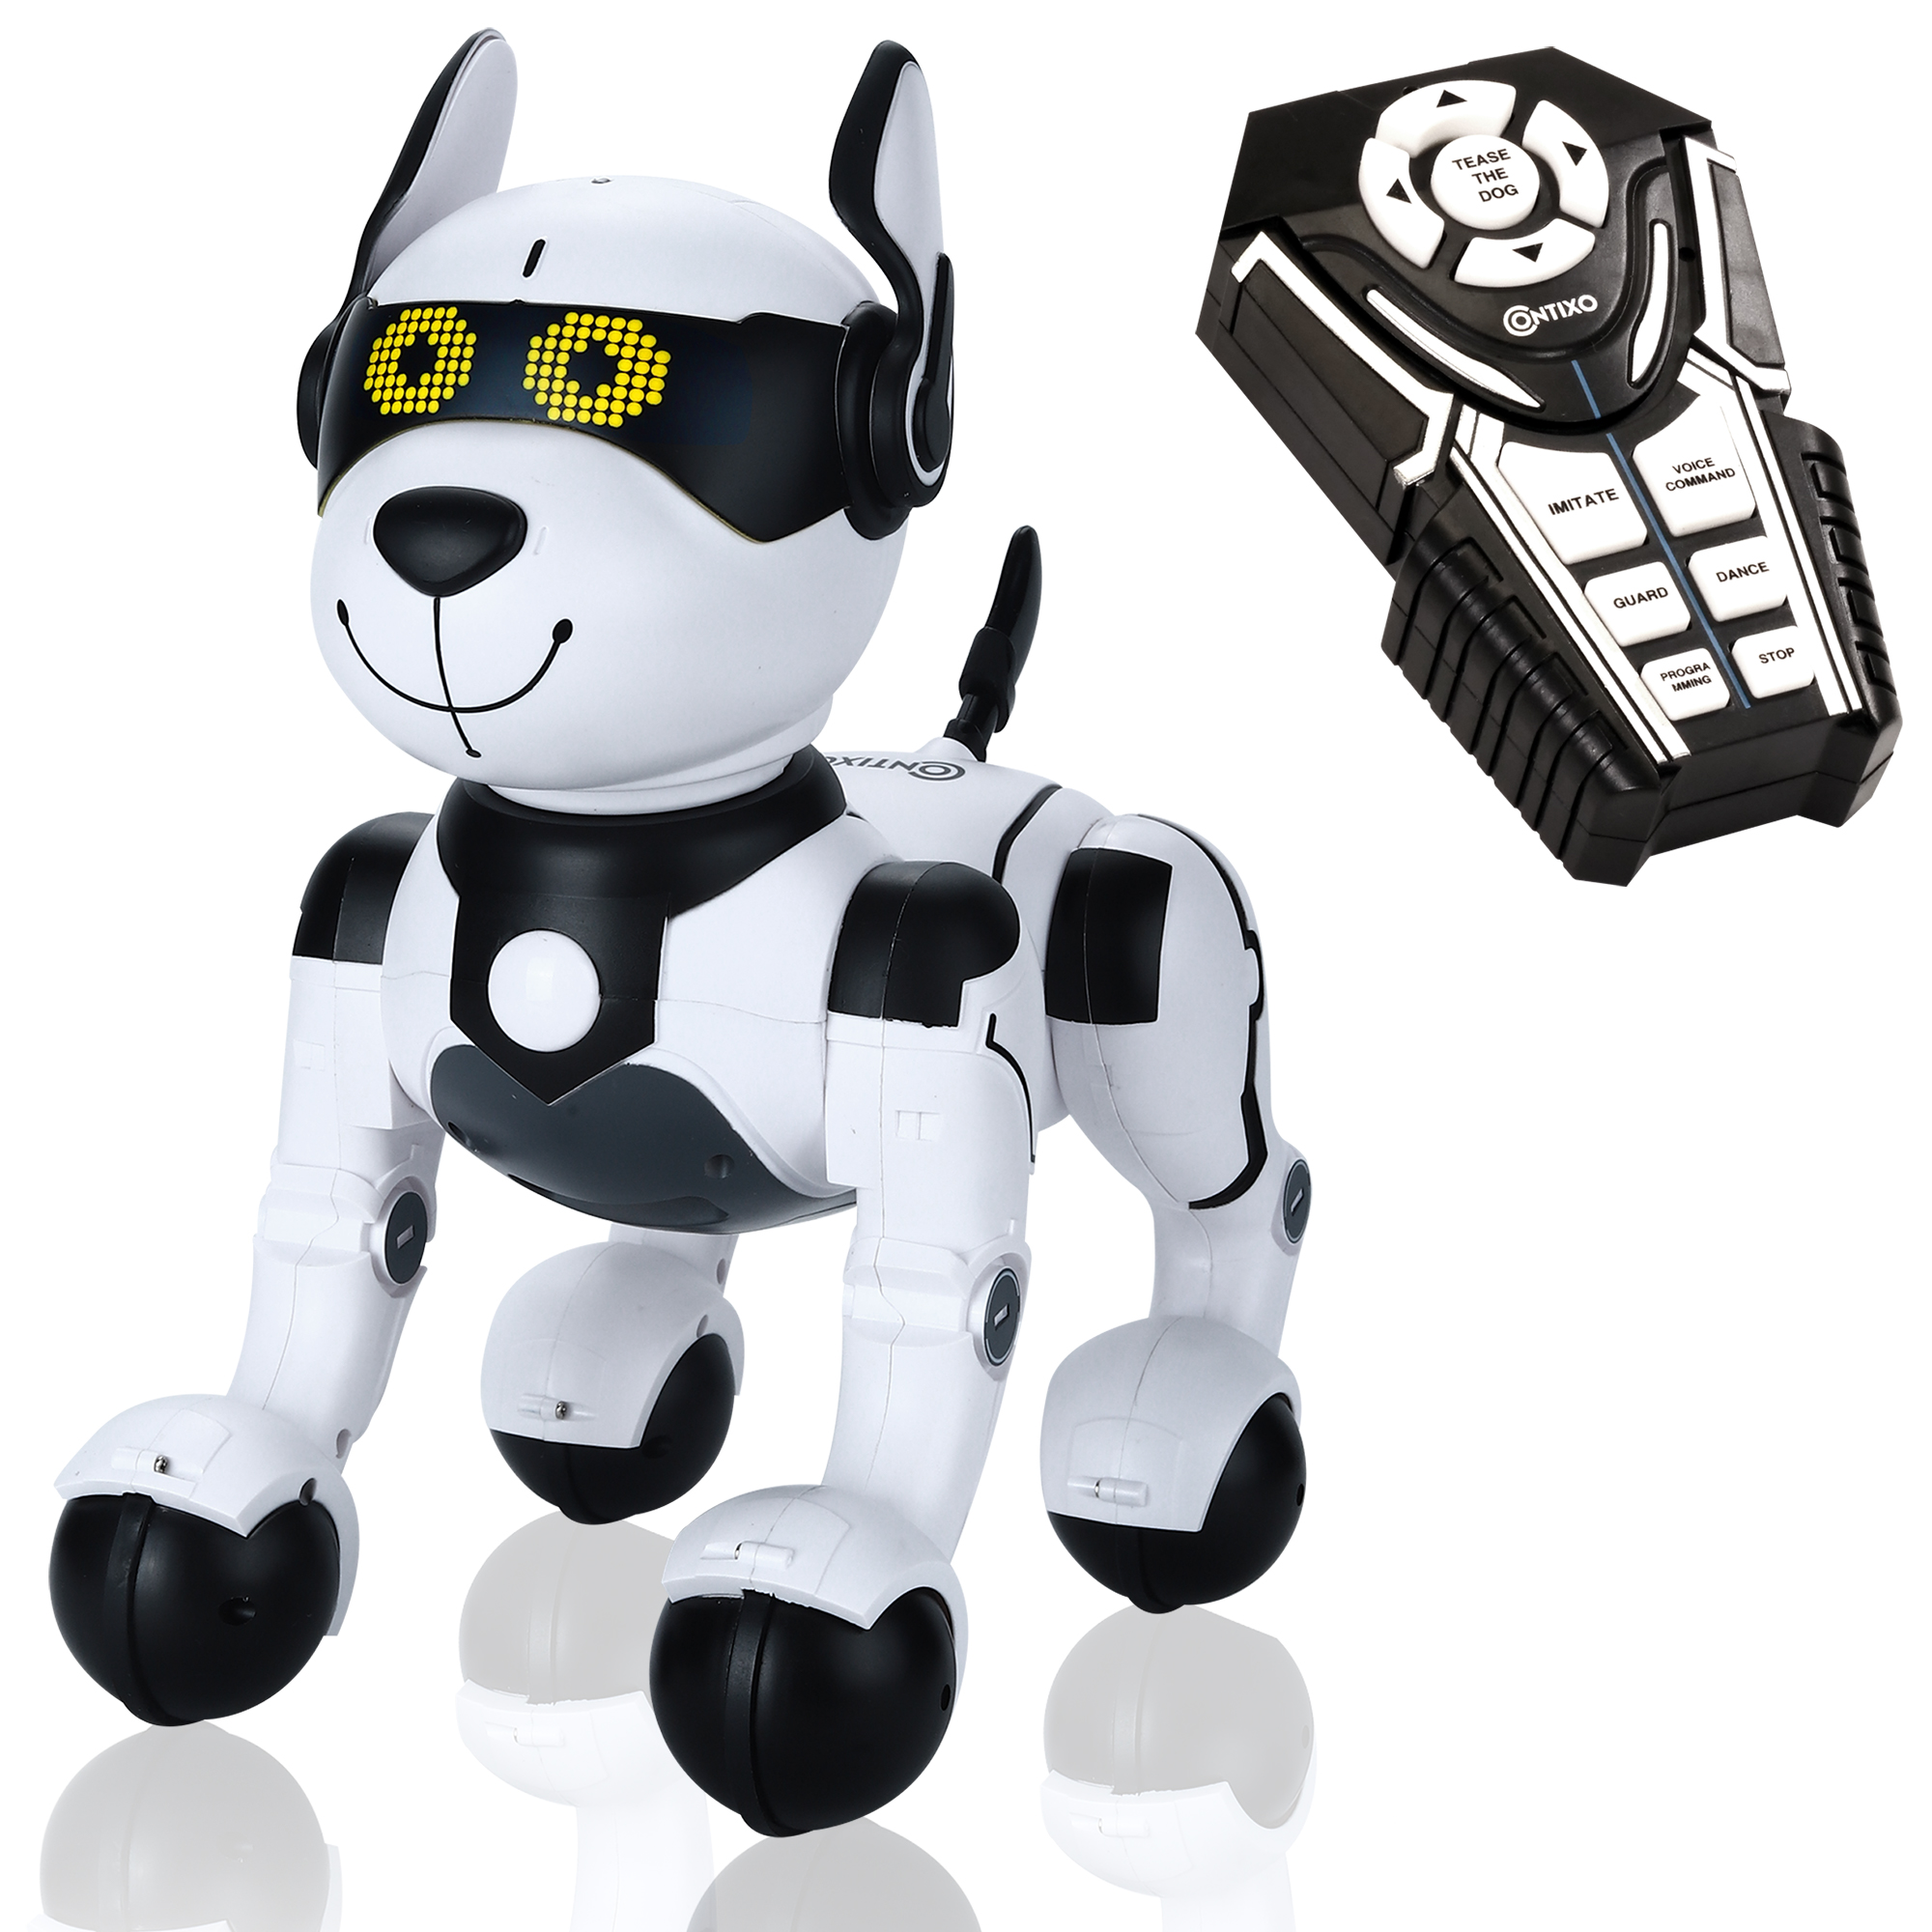 Contixo R4 Dog RC Toy Robot Electronic Pet, Walking Pet Toy Robots for Kids, Remote Control, Interactive & Smart Dancing, Voice Commands, RC Dog Gift toy for Girls & Boys Ages 2,3,4,5,6,7,8,9 10Years - image 1 of 17